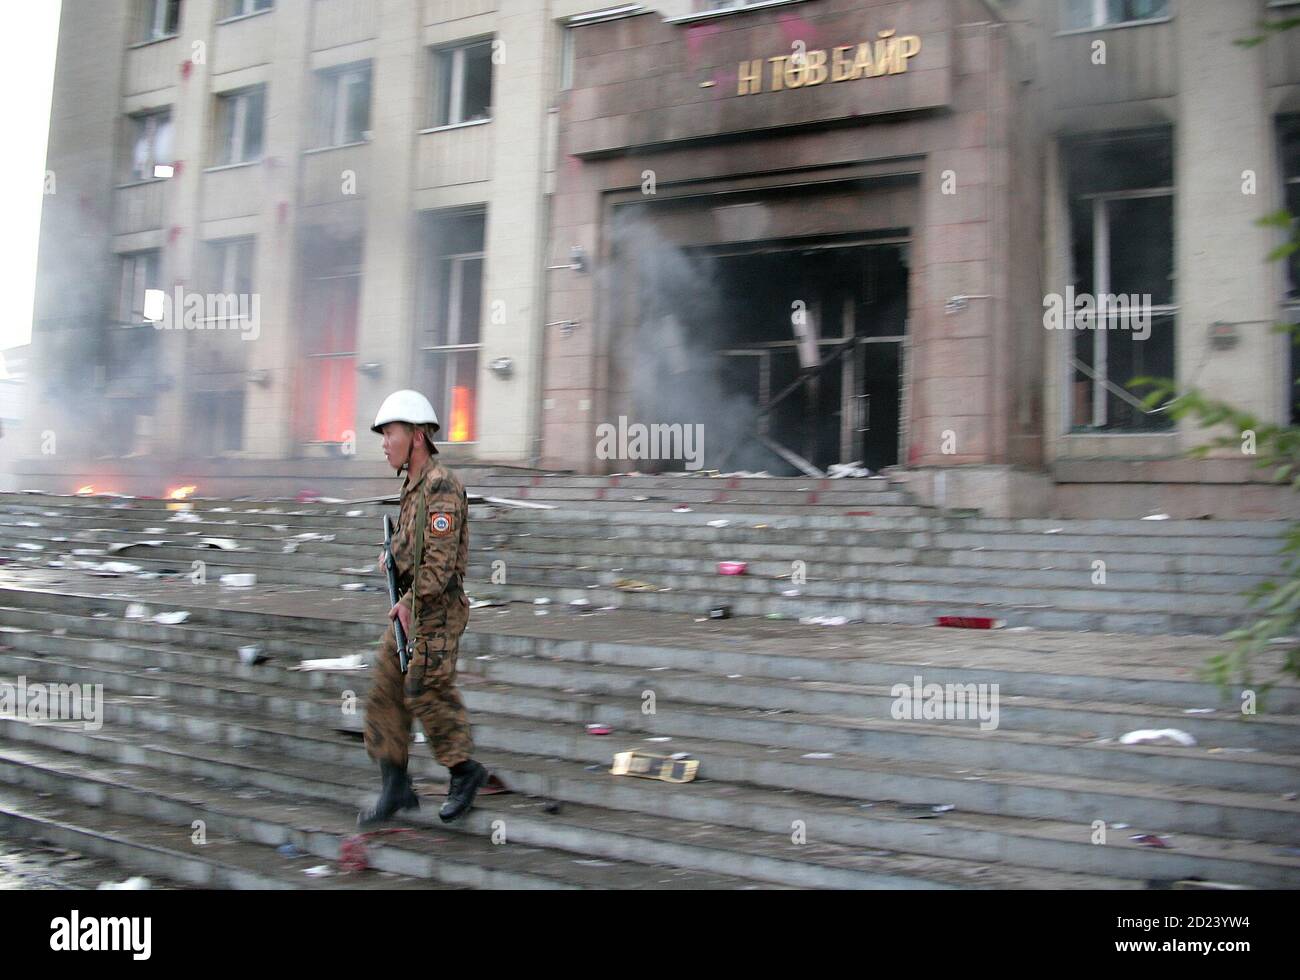 A soldier stands outside the Mongolian People's Revolutionary Party (MPRP) building during clashes between protestors and police in Ulan Bator, Mongolia, July 1, 2008. Five people were killed and more than 300 injured in a riot in Mongolia's capital among people alleging fraud in a weekend election, the country's justice minister said on Wednesday. Picture taken July 1, 2008.    REUTERS/Zeev Rozen (MONGOLIA) Stock Photo